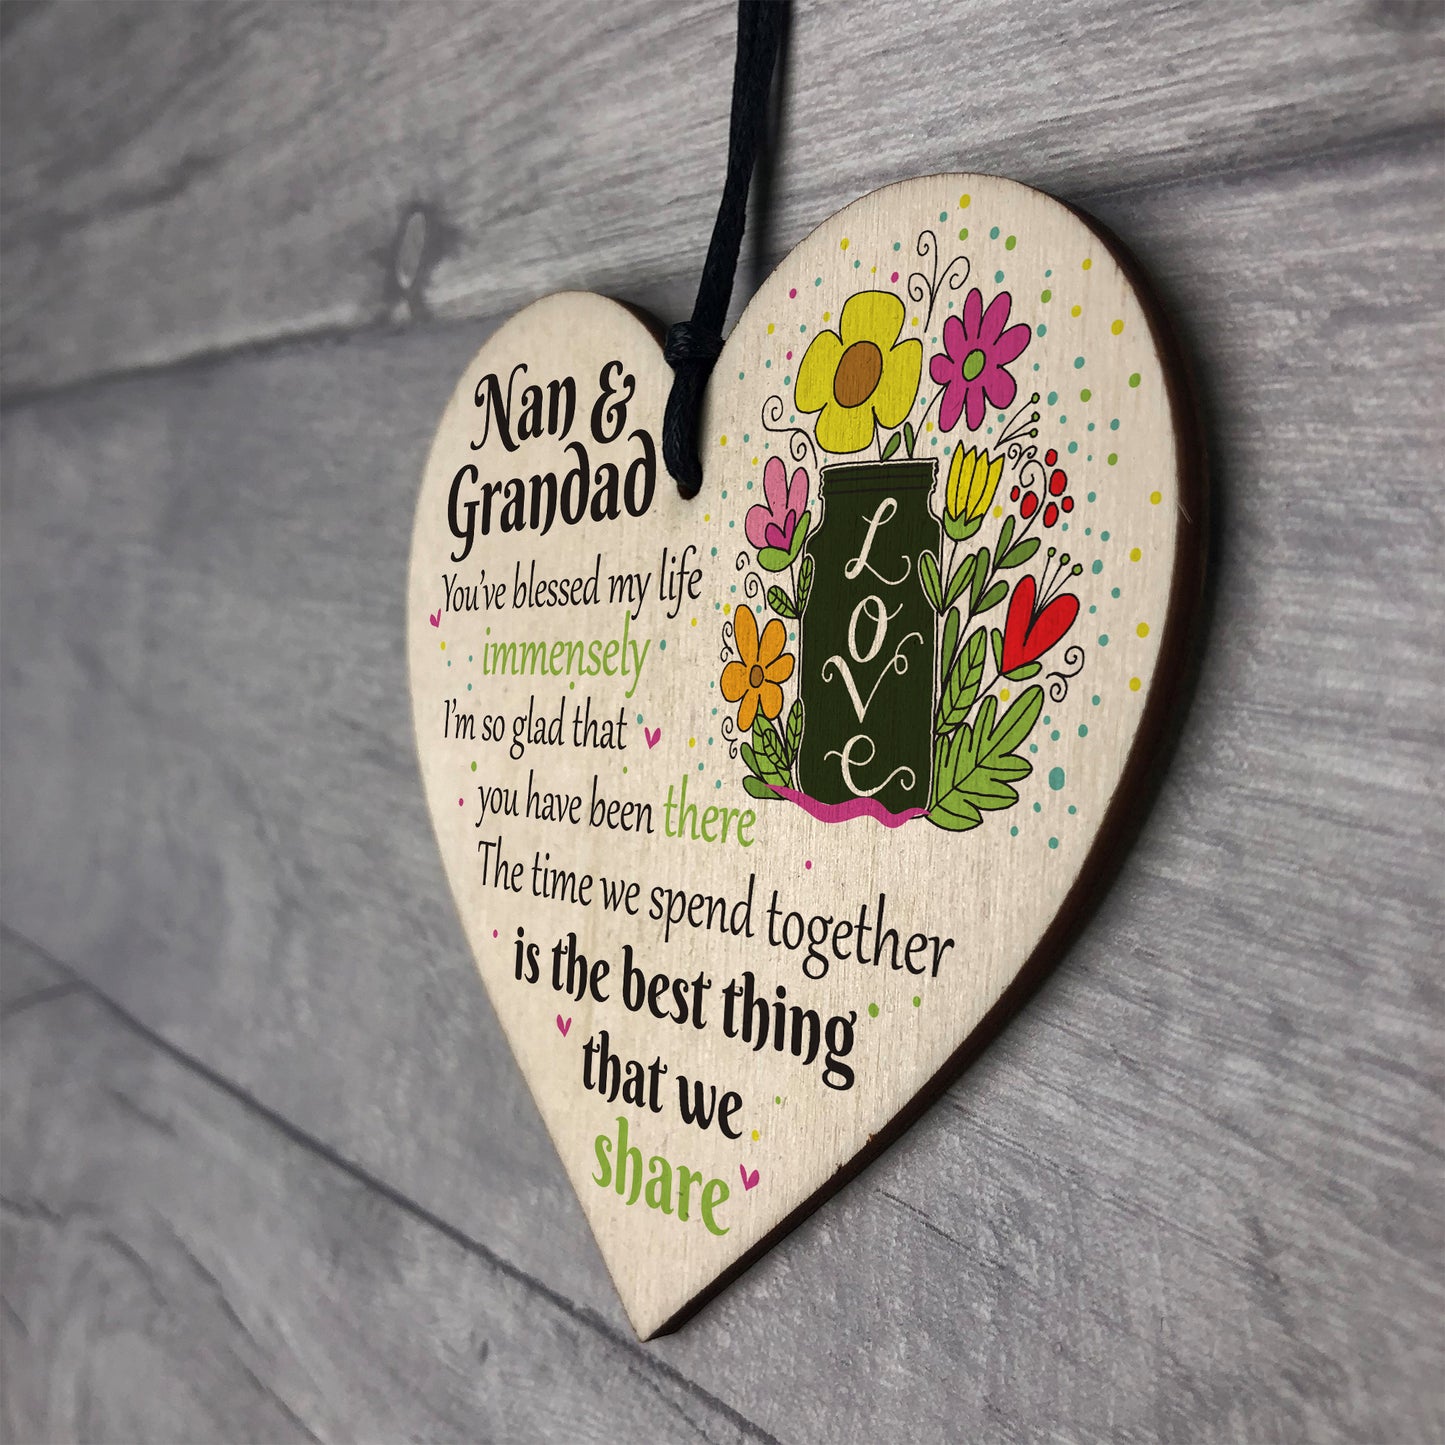 Nan and Grandad Time We Share Wood Hanging Heart Grandparents